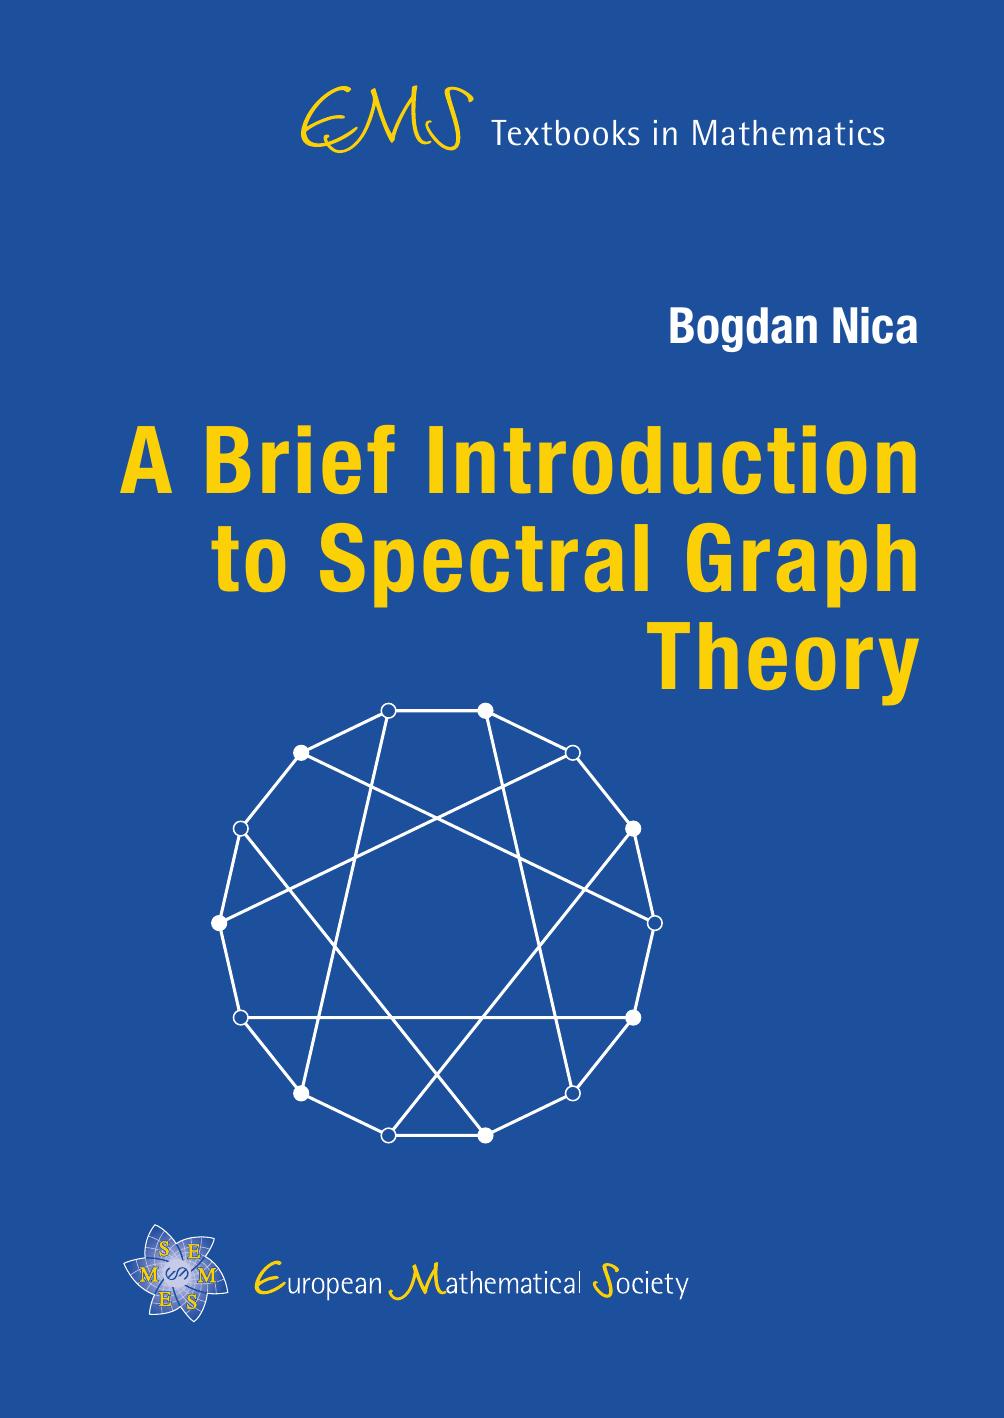 A Brief Introduction to Spectral Graph Theory by Bogdan Nica (z-lib.org)